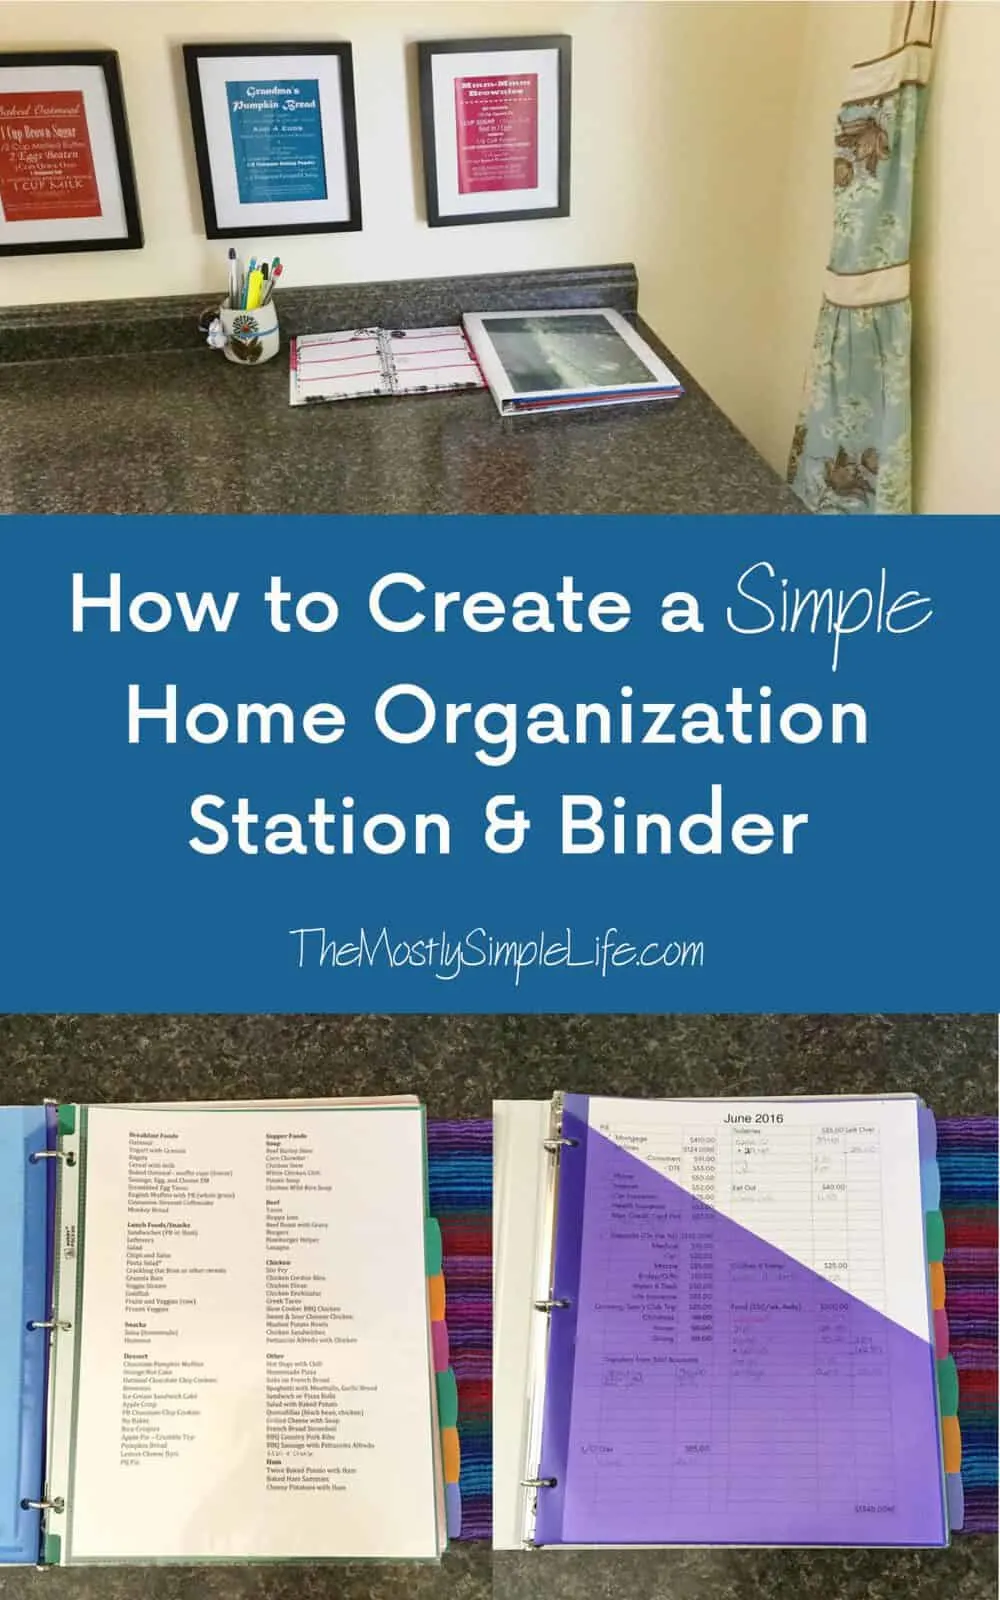 Creating a Simple Home Organization Station & Binder